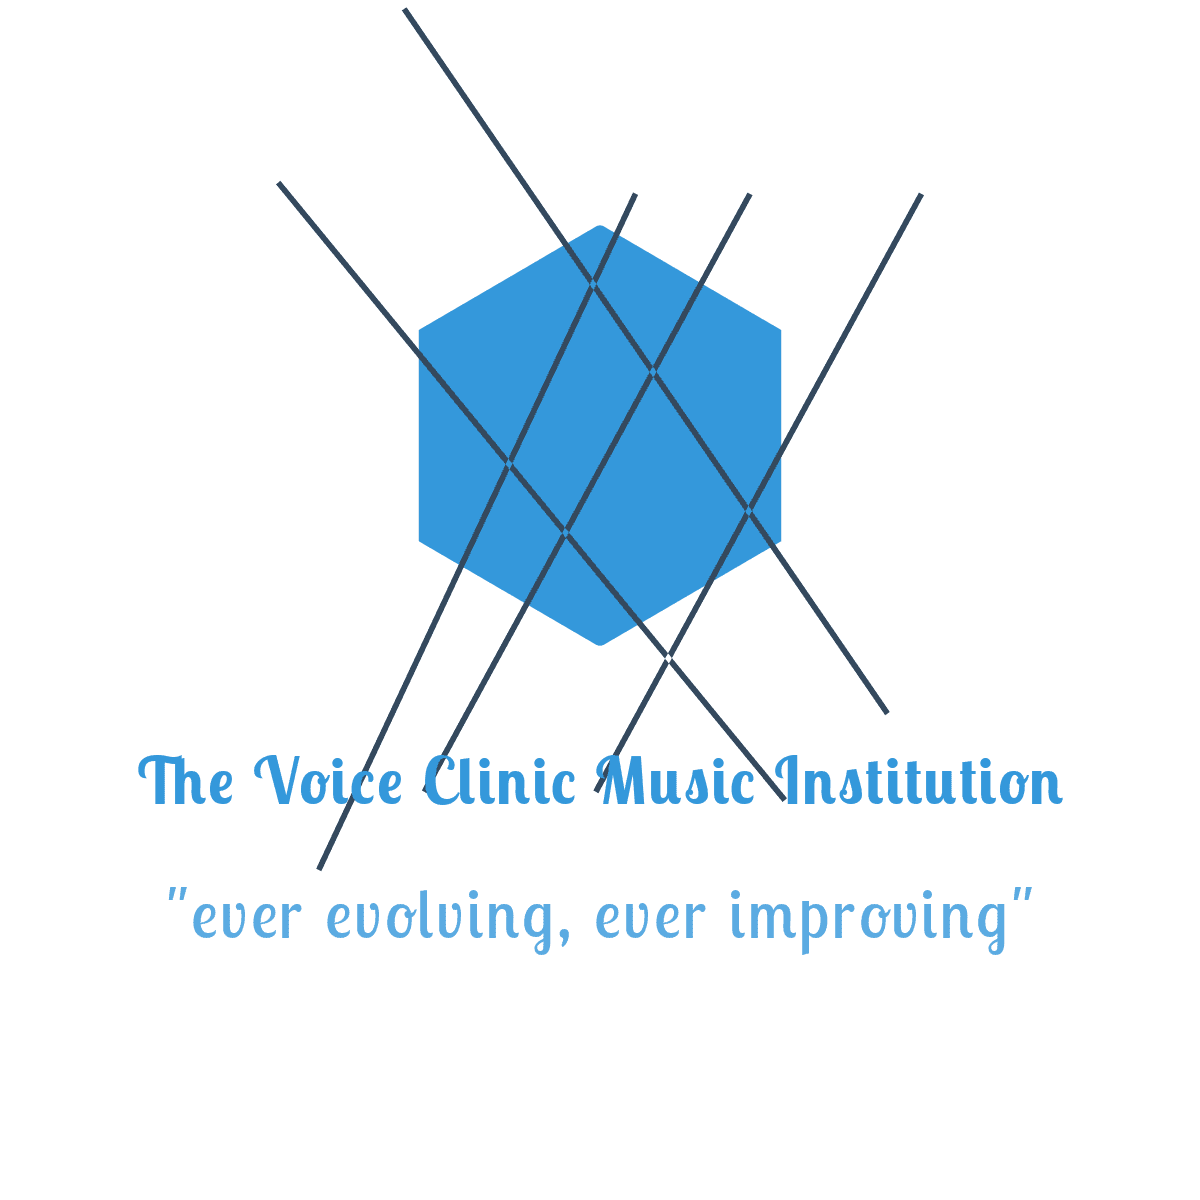 The Voice Clinic Music Institution